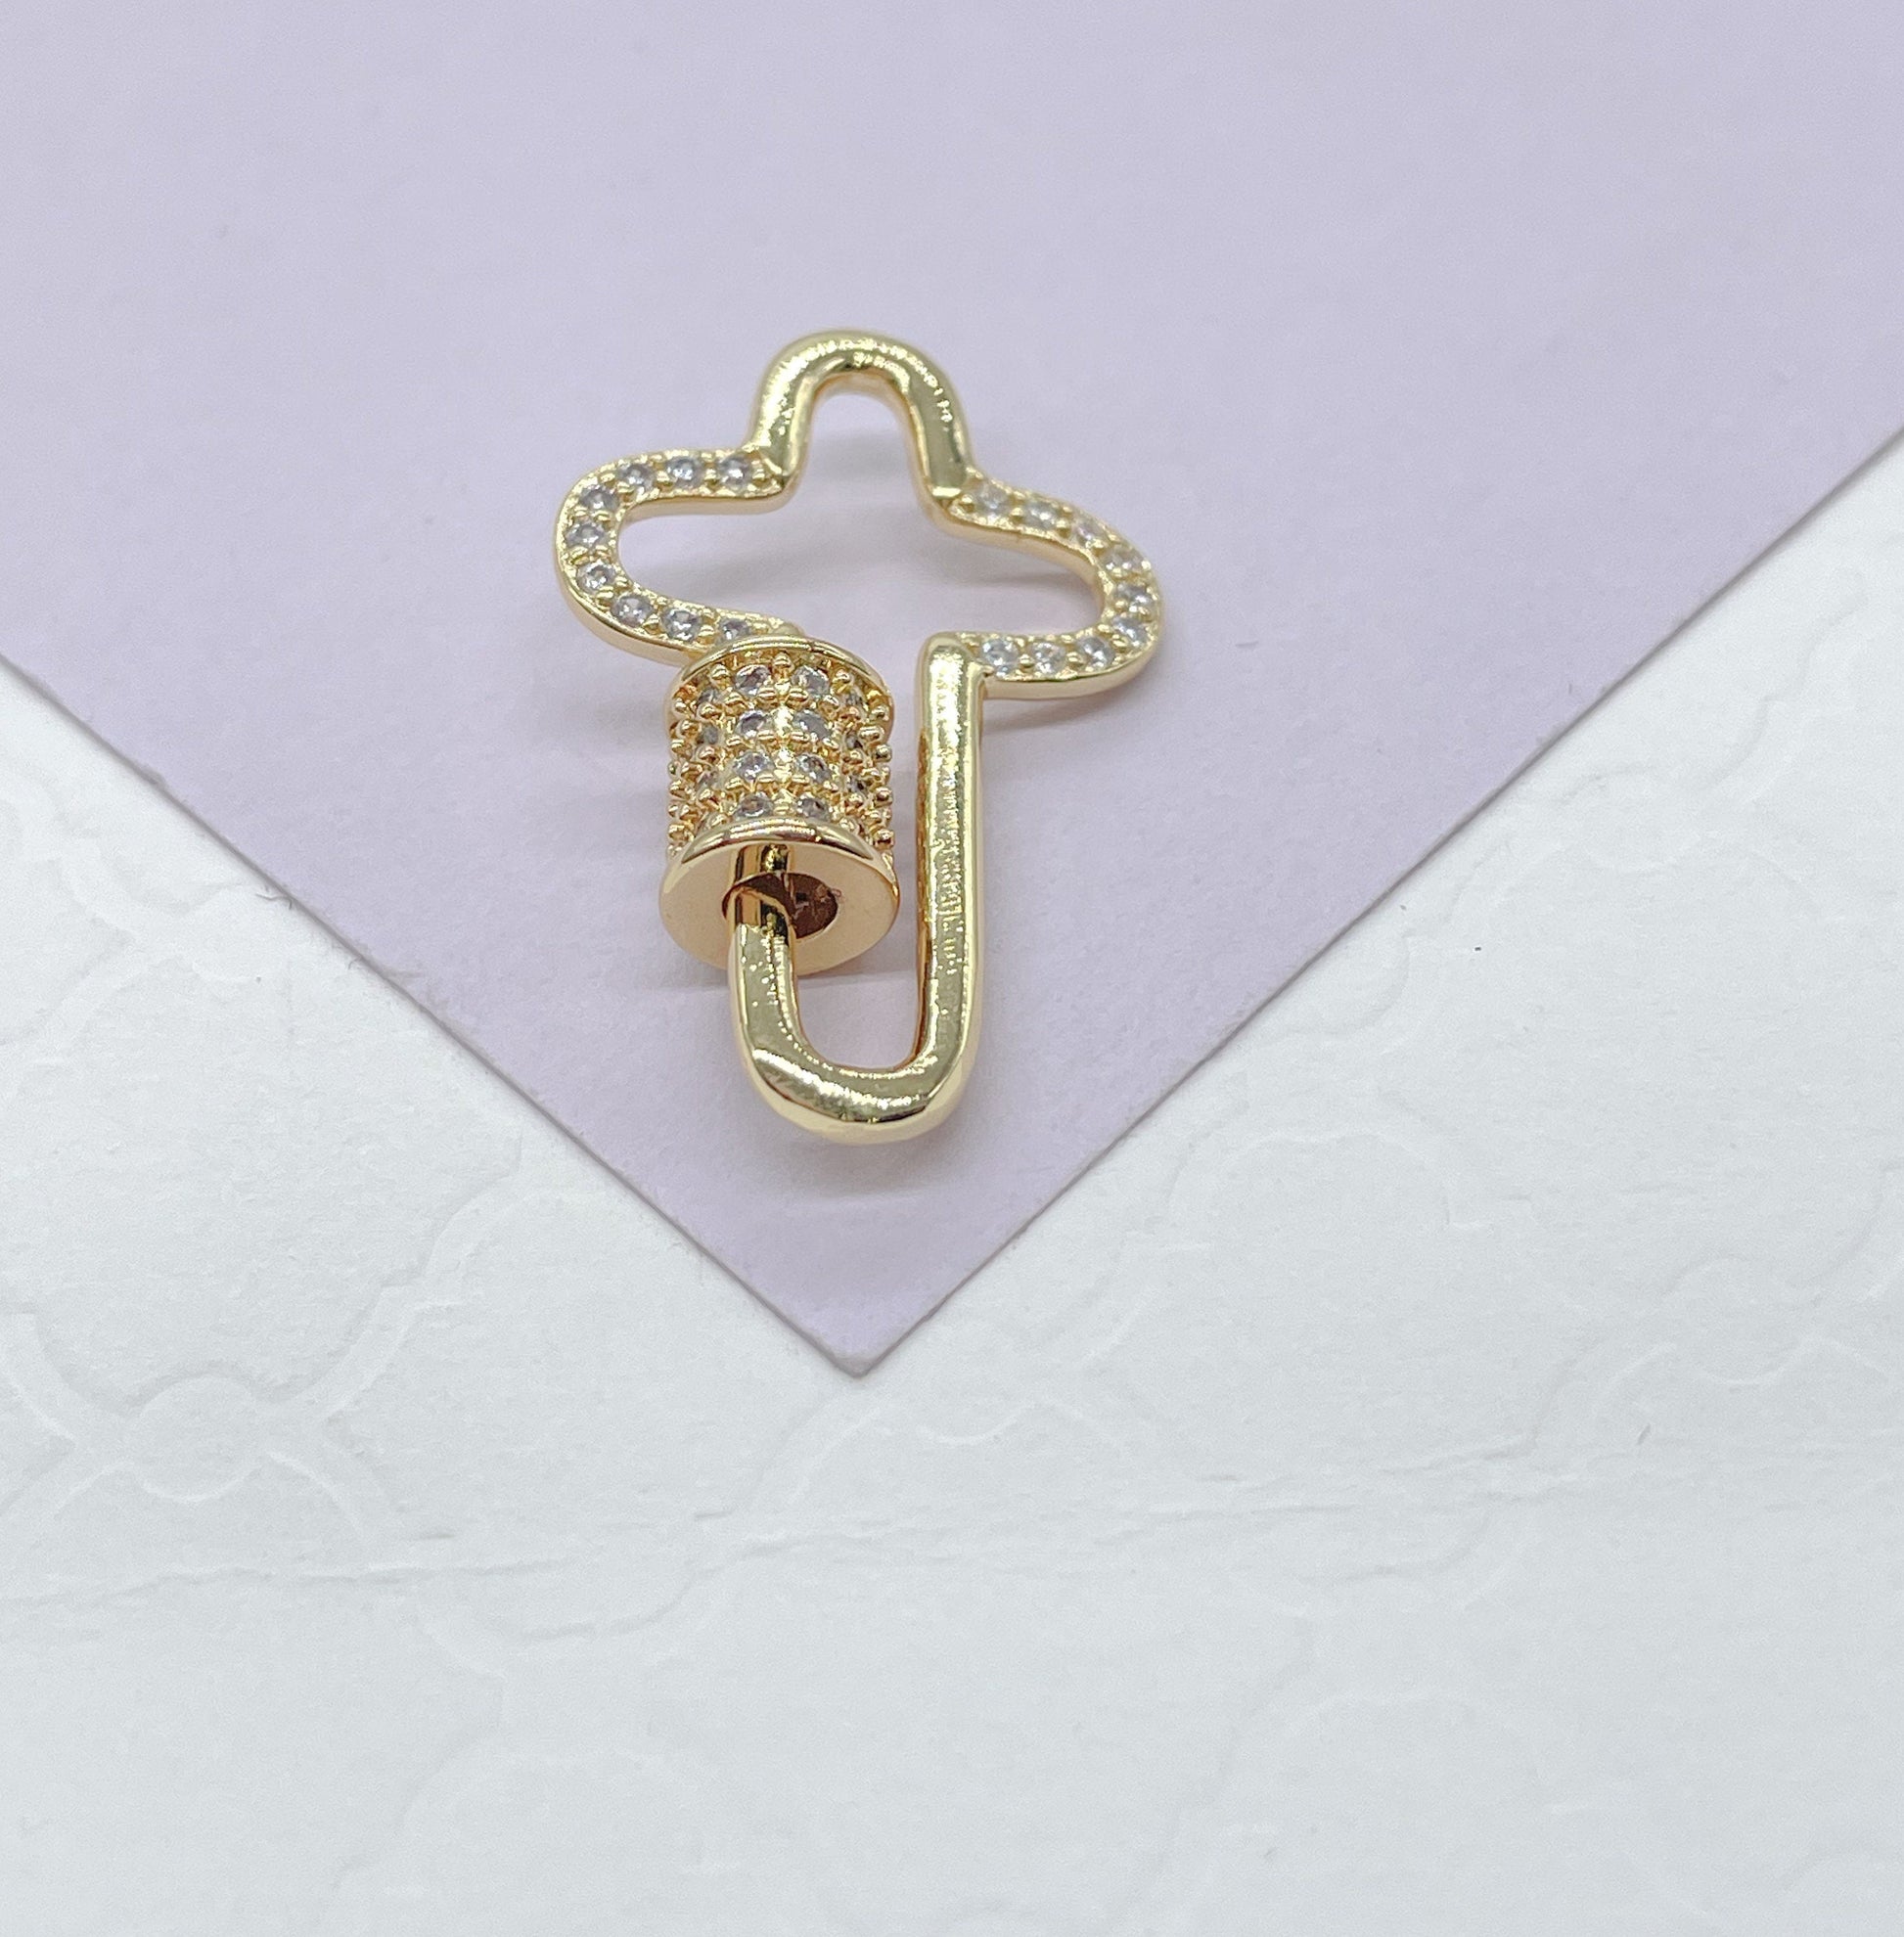 18k Gold Filled Smooth Cross Carabiner Clasp With CZ Pave Closure